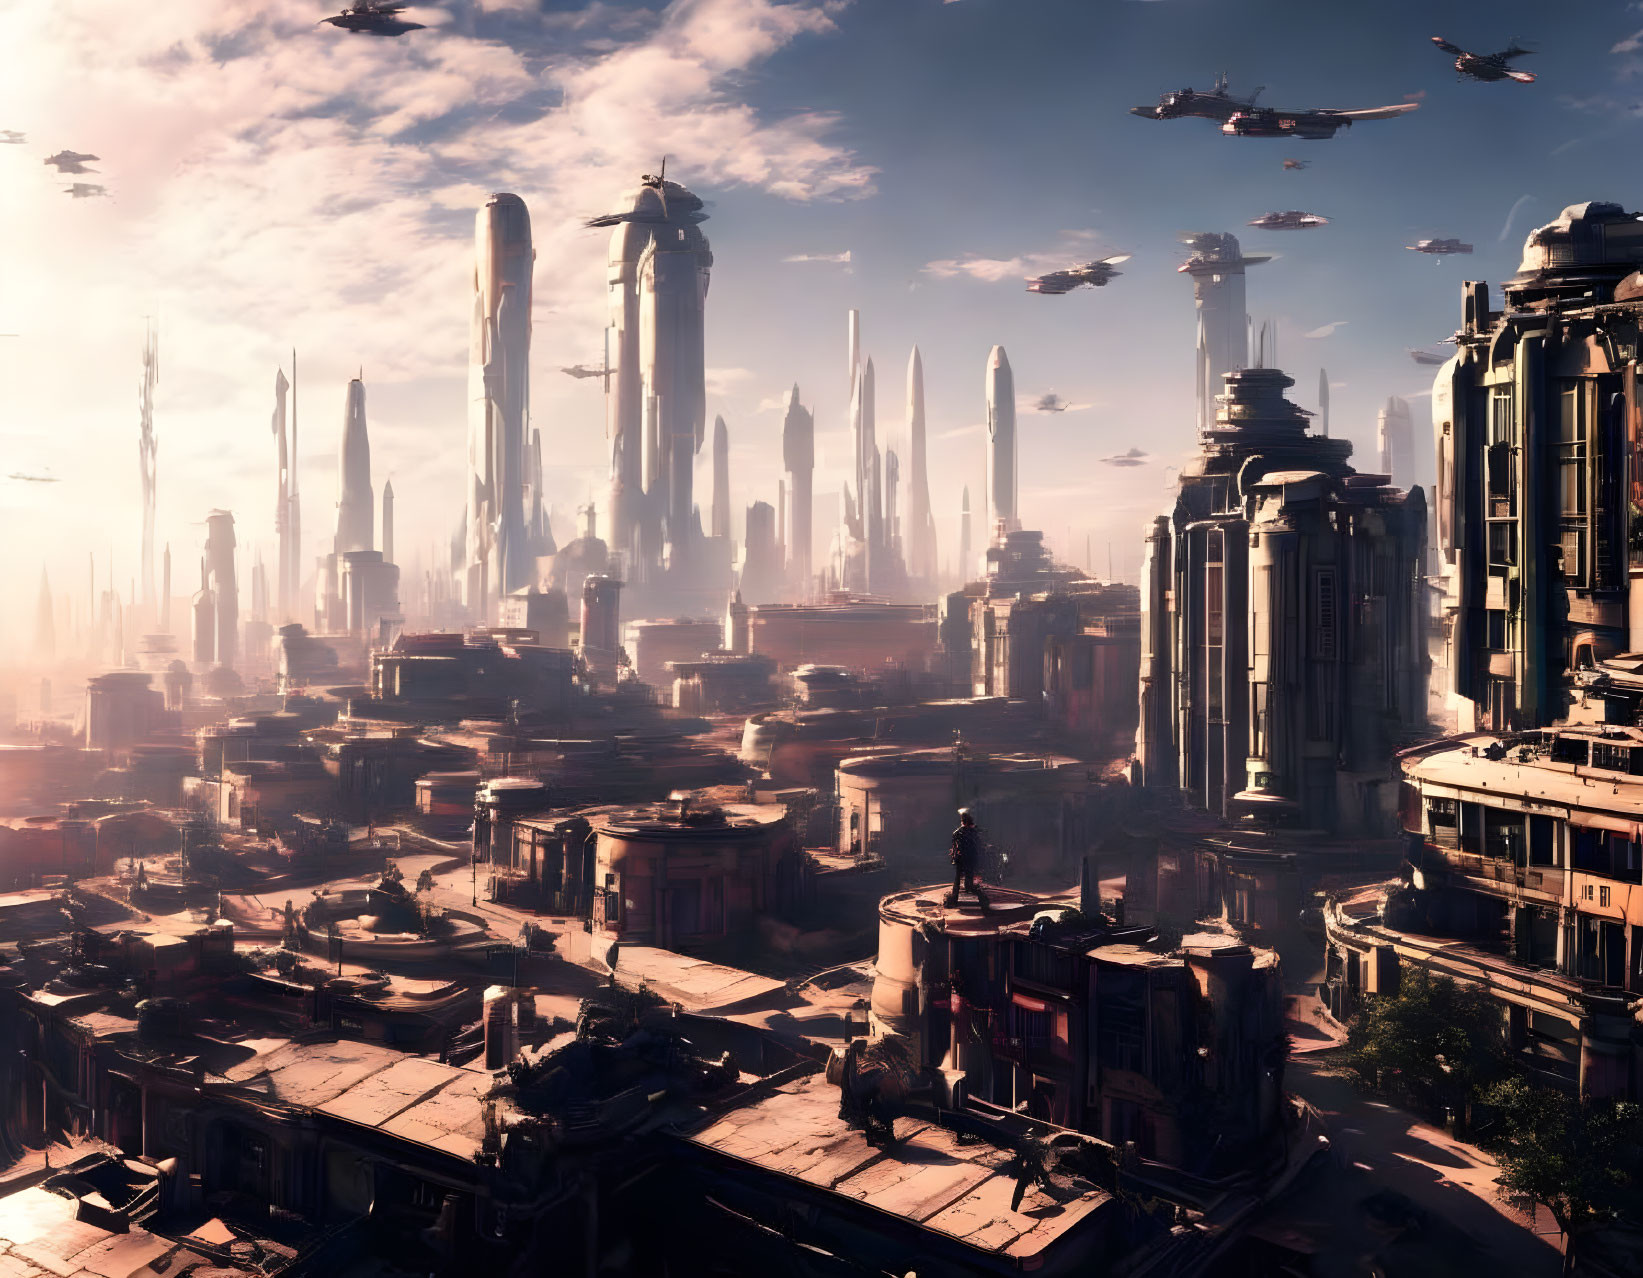 Futuristic cityscape with tall skyscrapers and flying vehicles